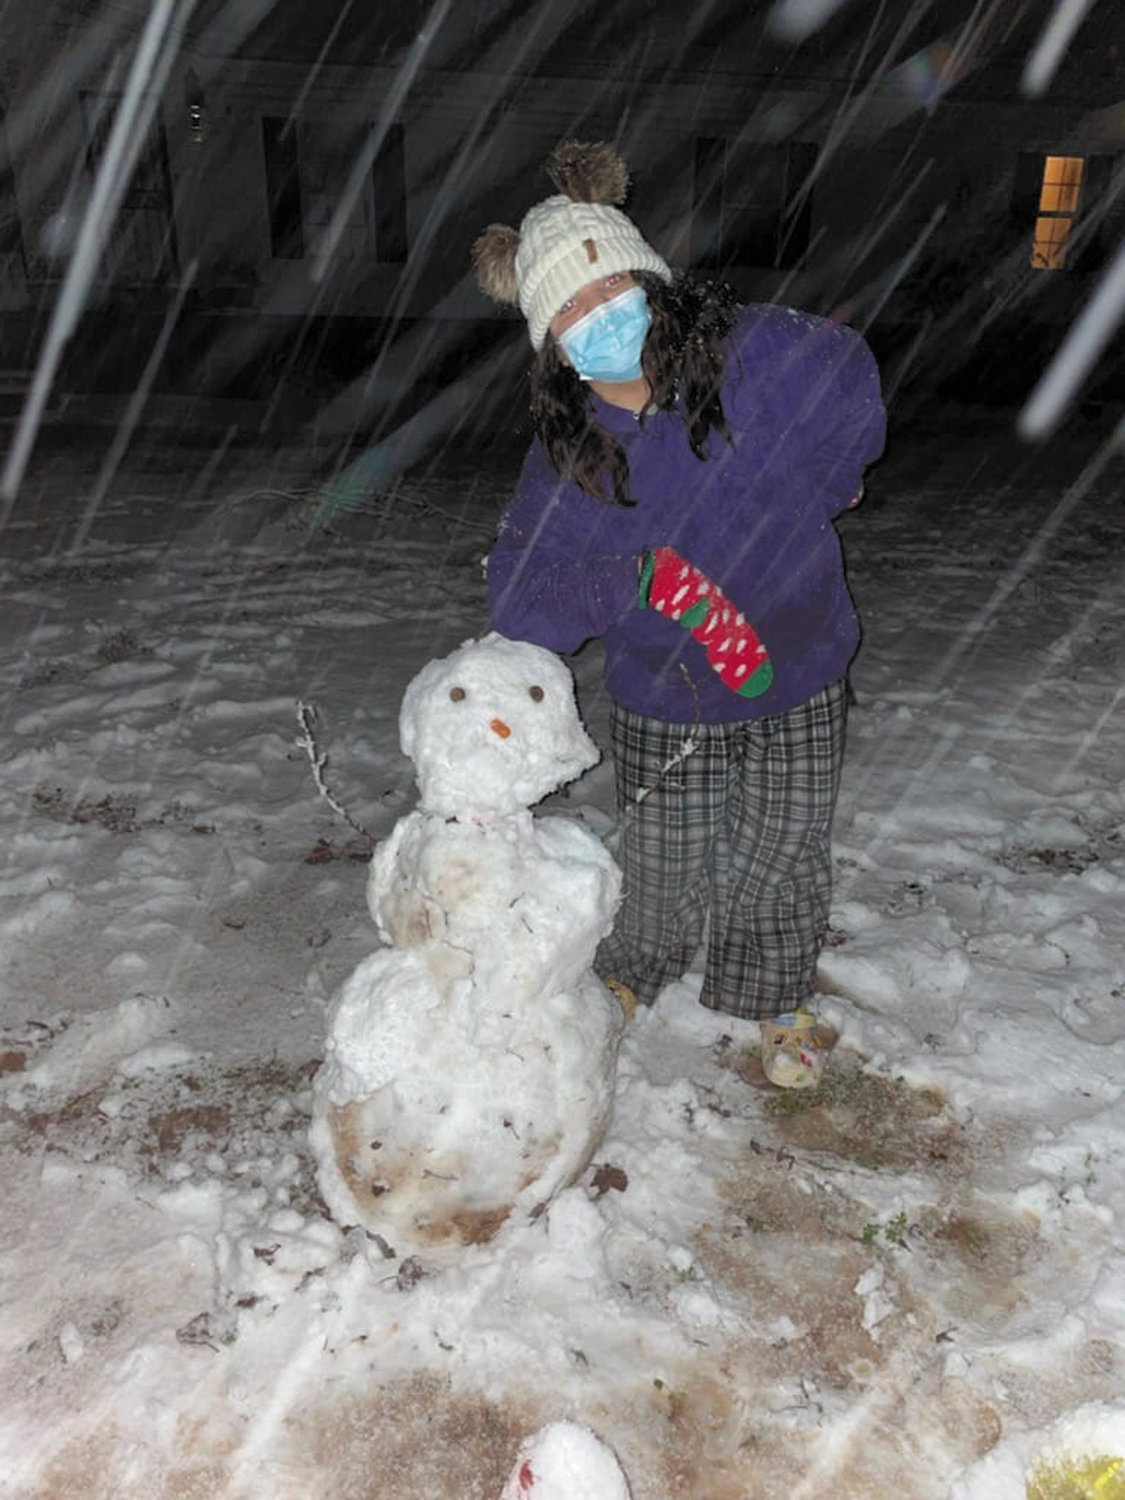 What better time for Olivia Grammer to build a snowman than during a snowstorm?